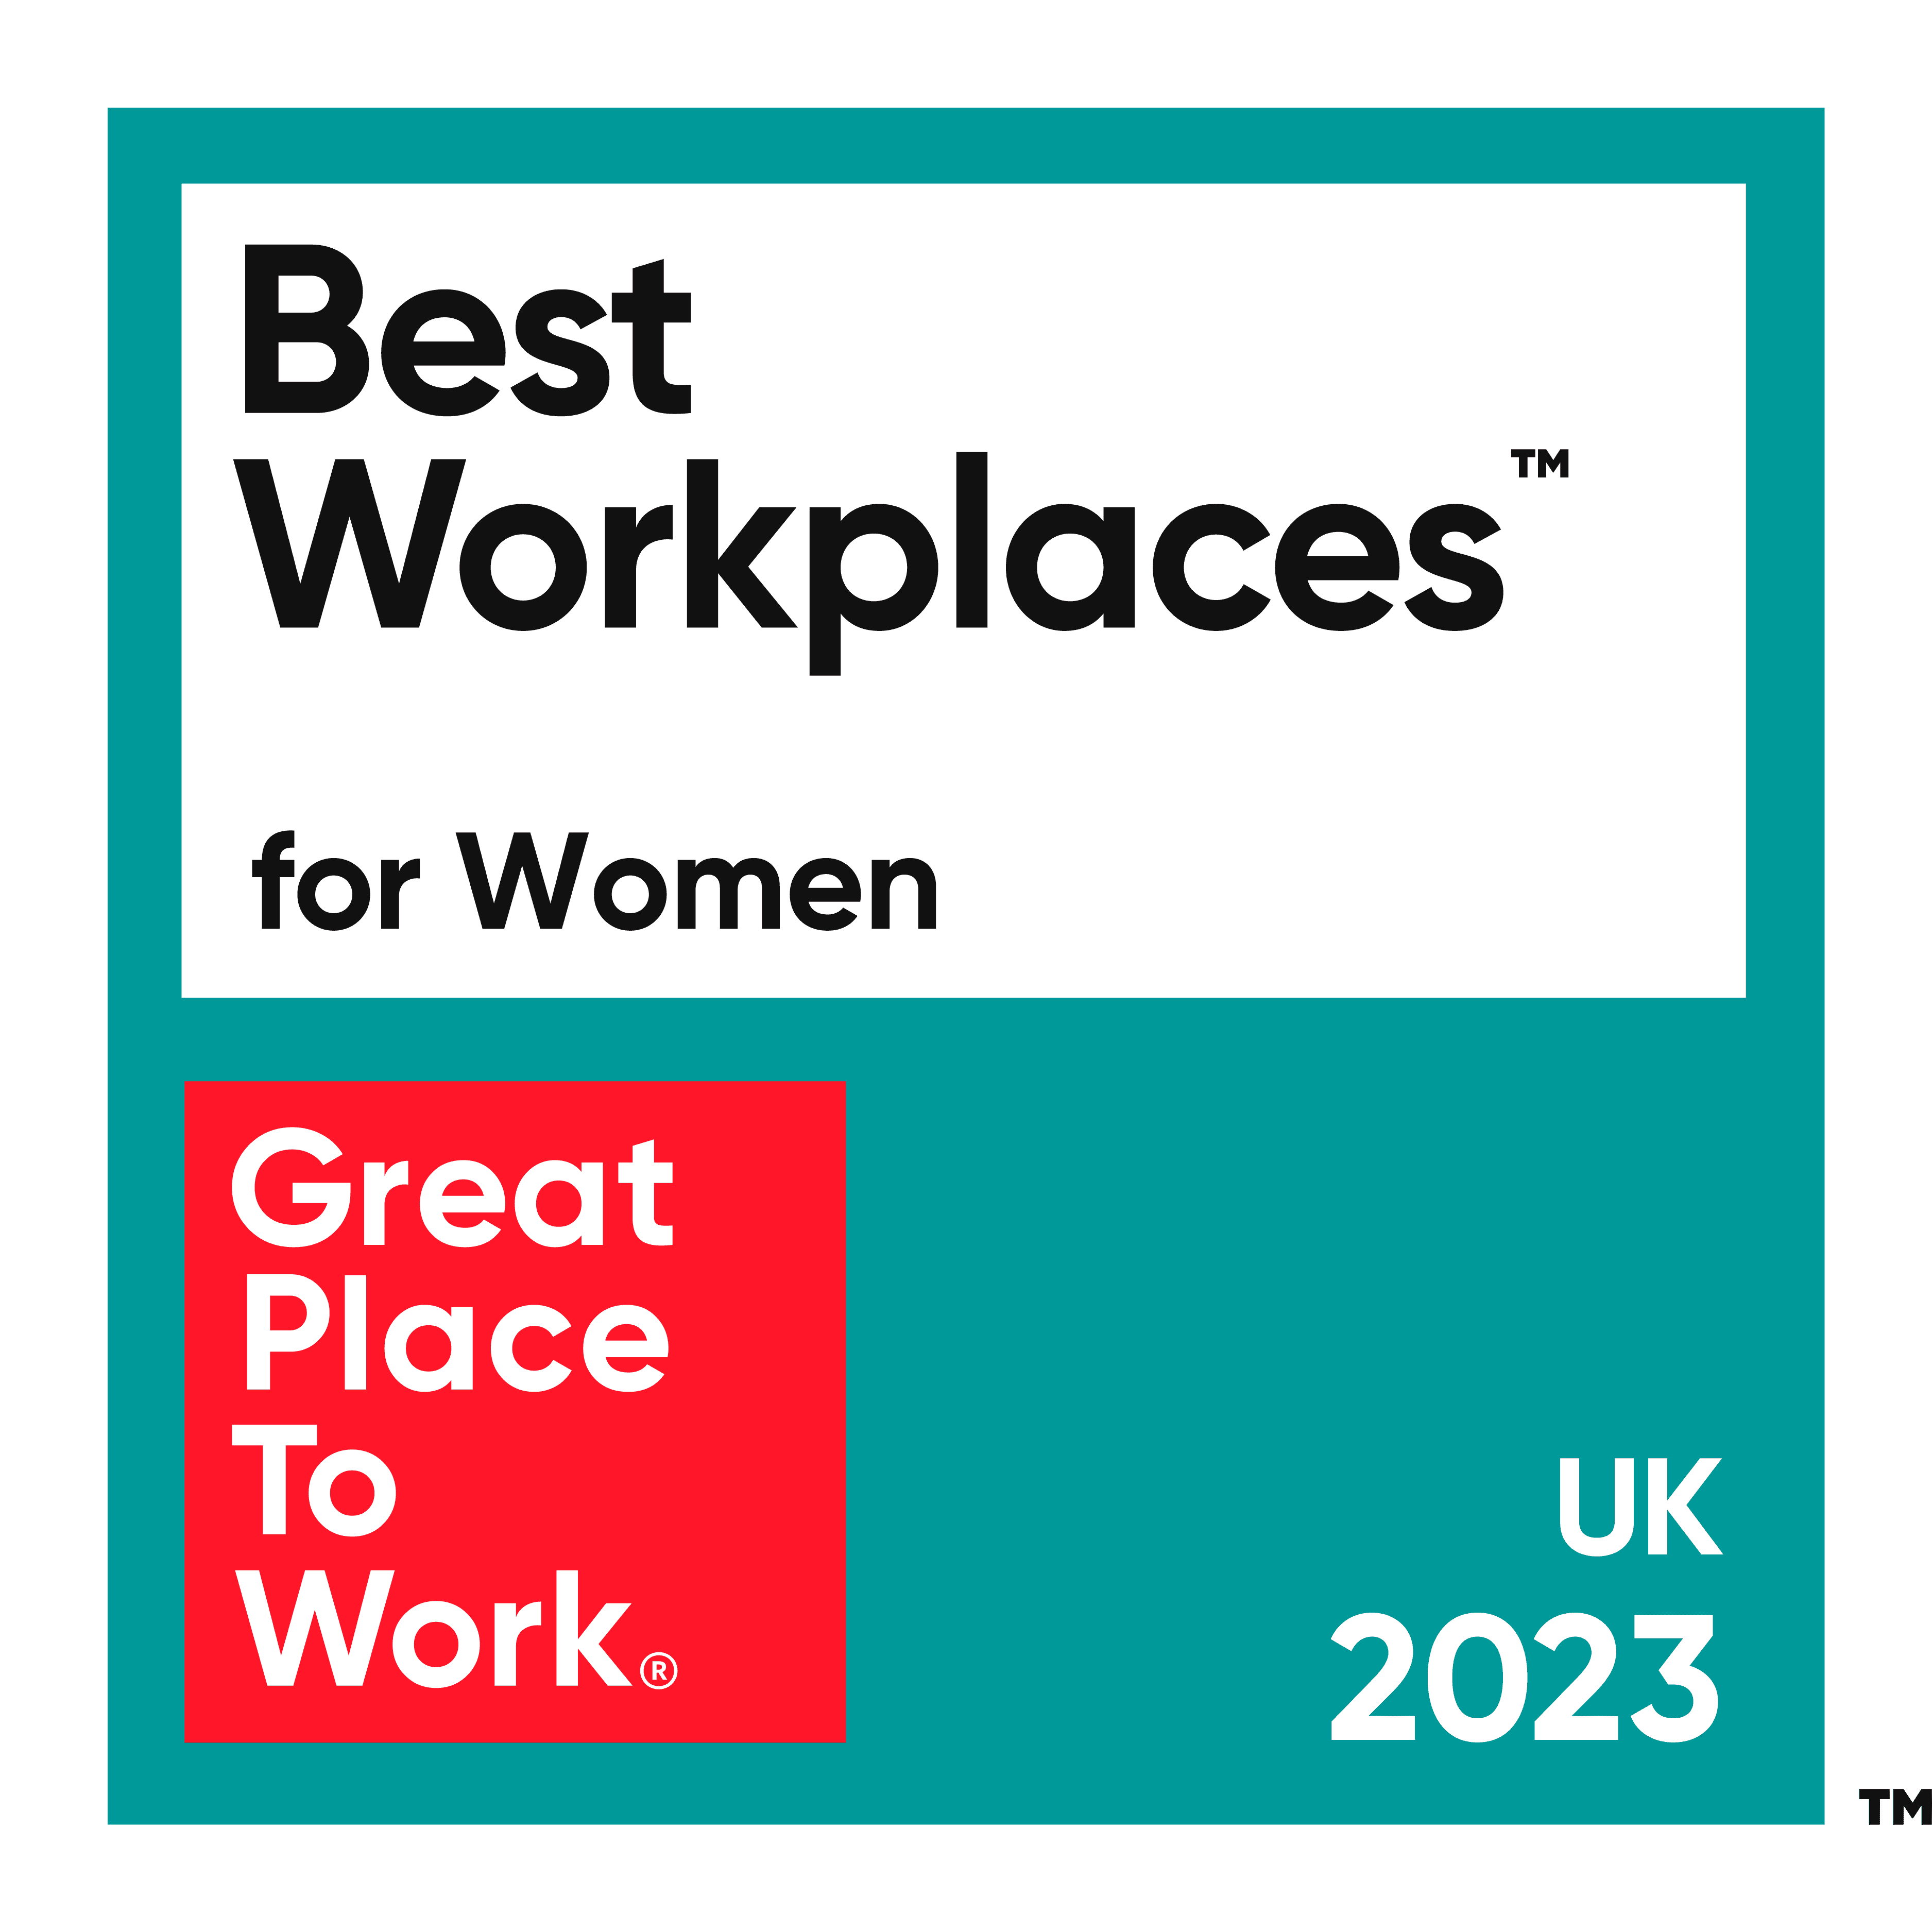 Best Workplaces for Women UK 2023